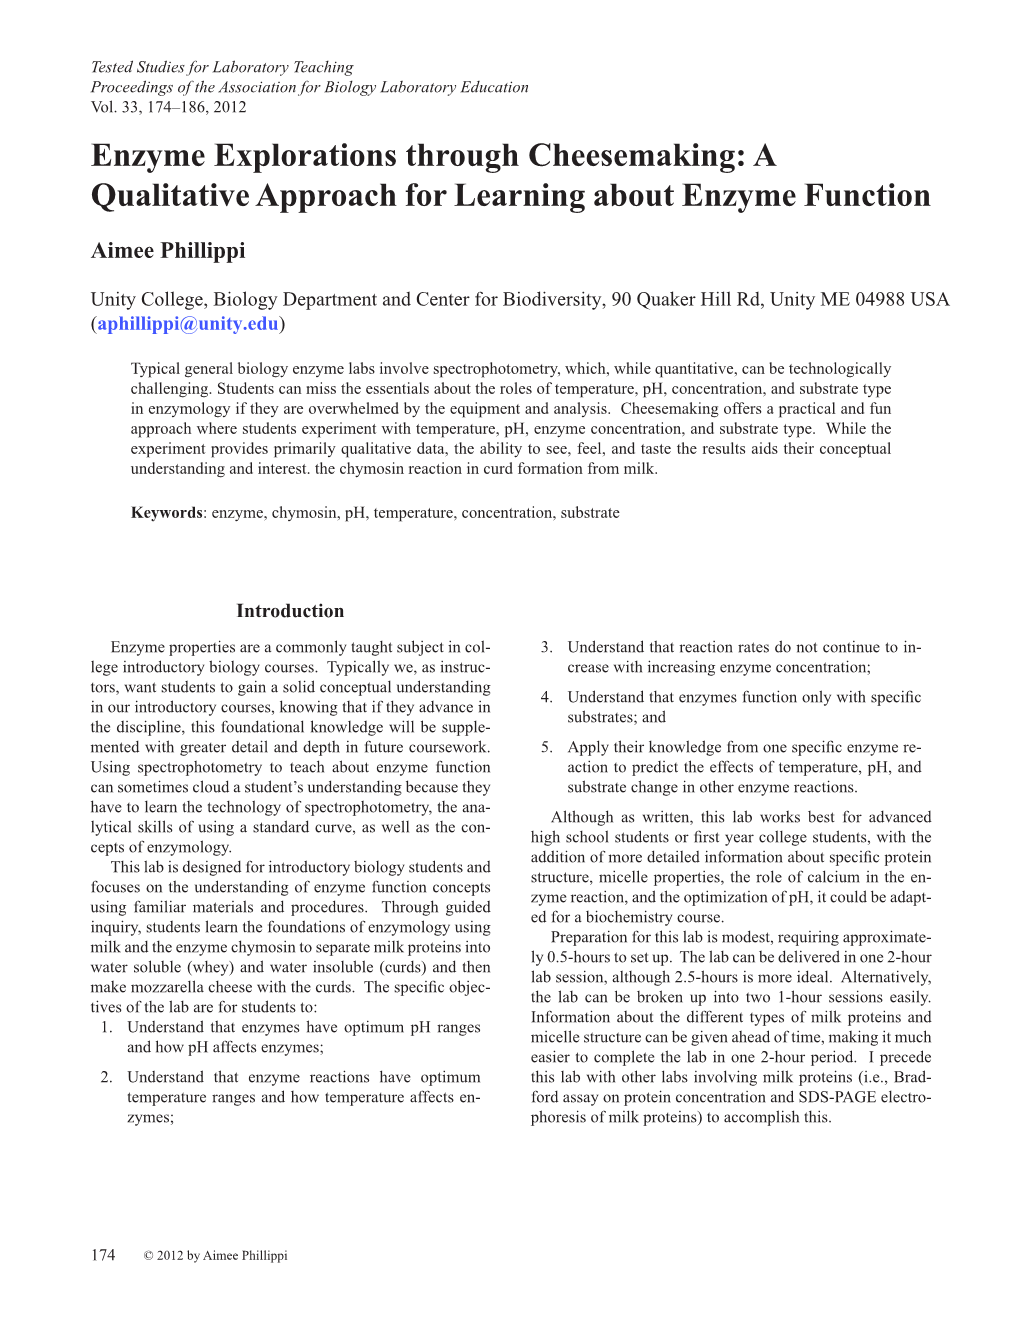 Enzyme Explorations Through Cheesemaking: a Qualitative Approach for Learning About Enzyme Function